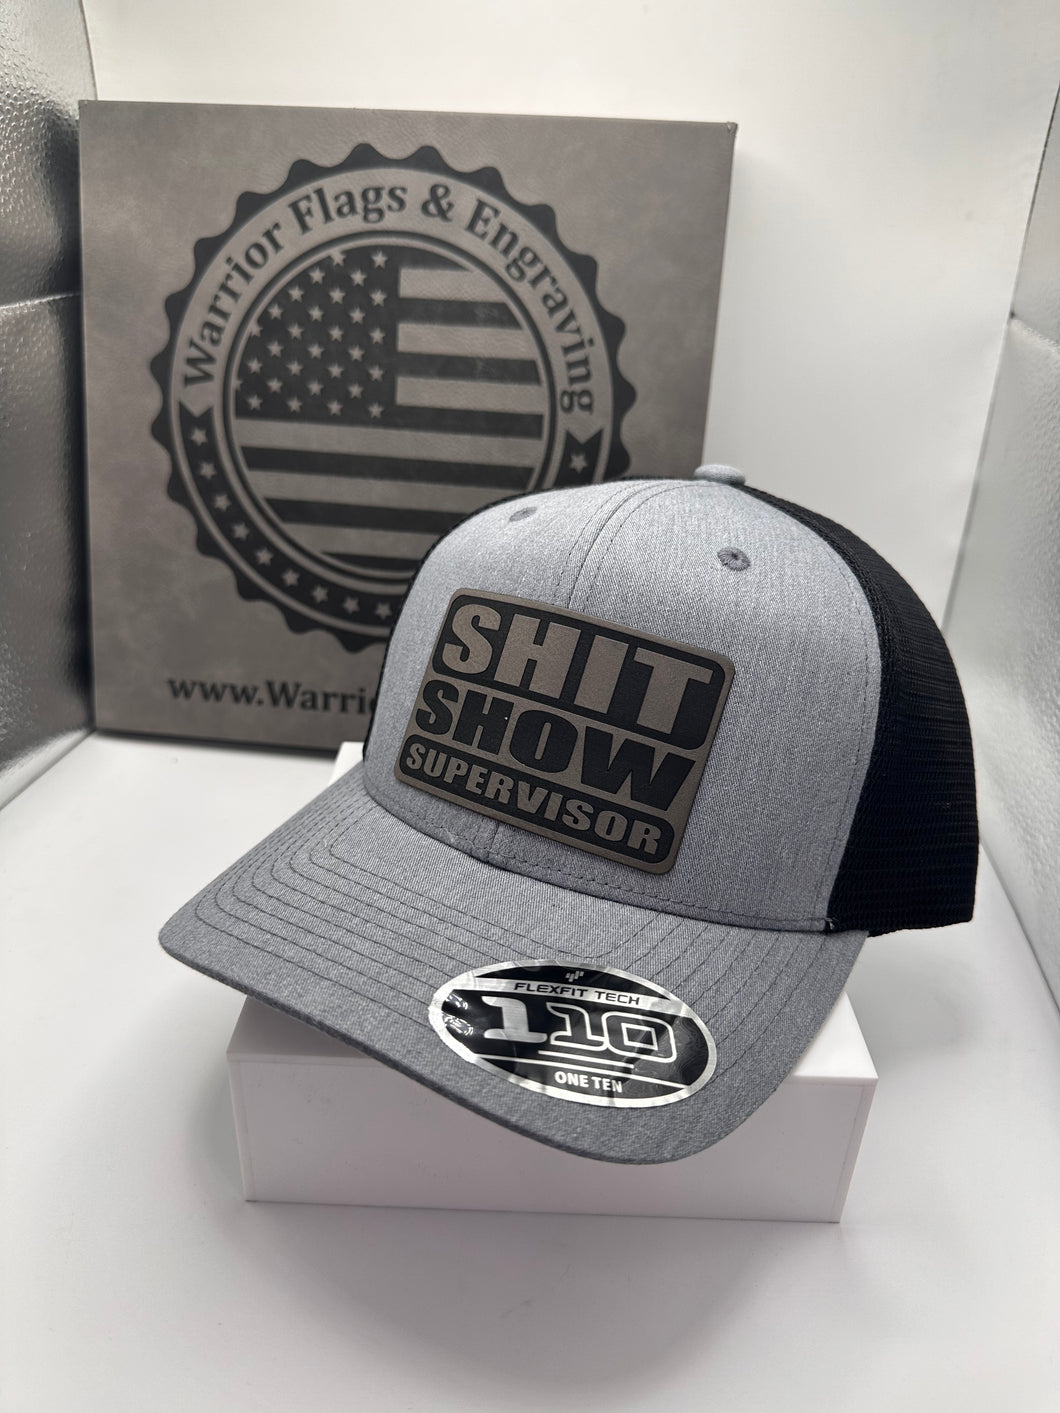 S#%! Show Supervisor Hat - Heather gray and black with gray patch